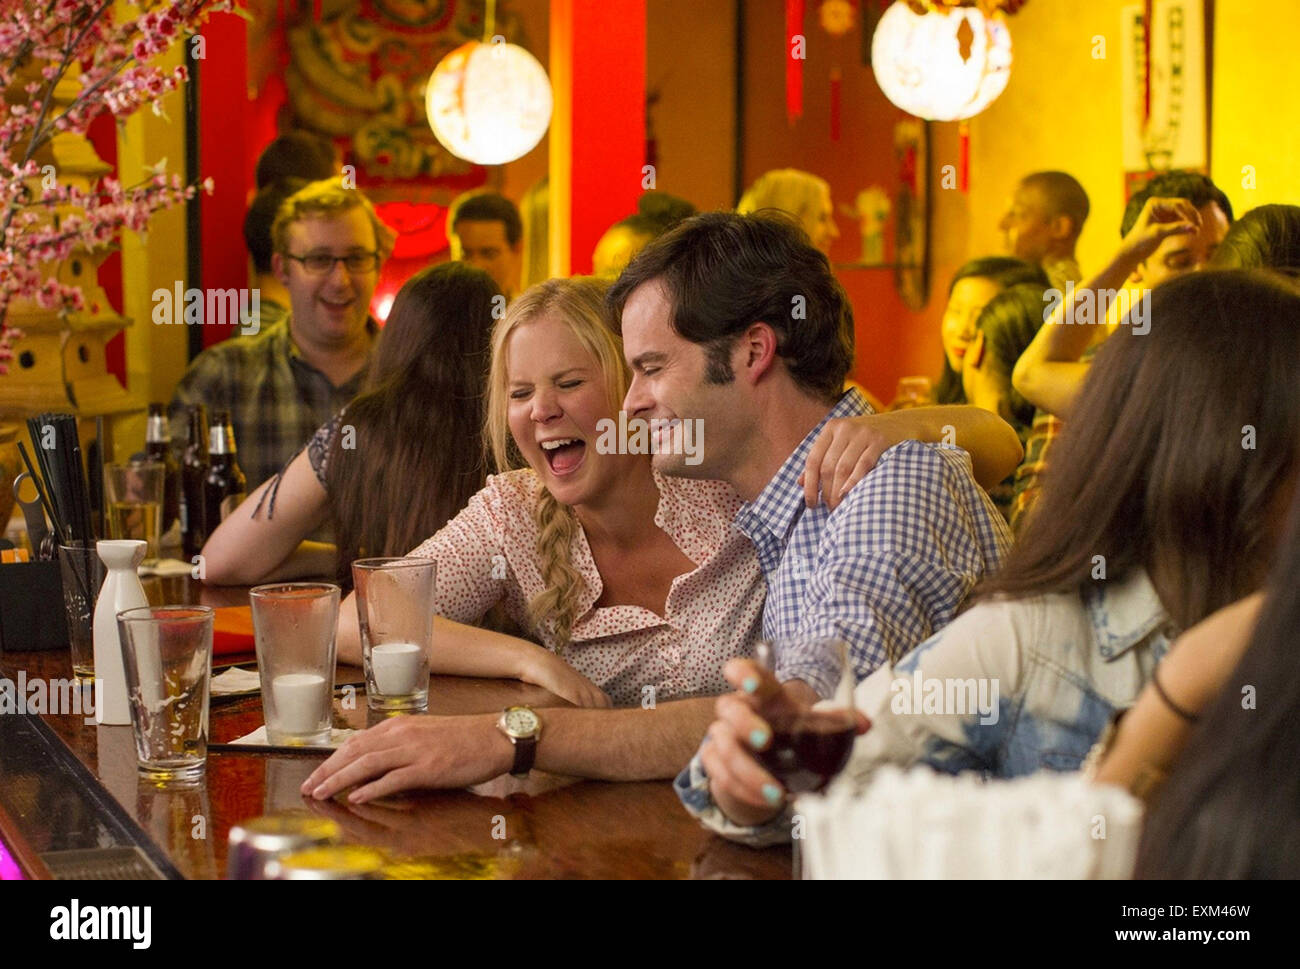 TRAINWRECK 2015 Universal Pictures film with Amy Schumer and Bill Hader Stock Photo